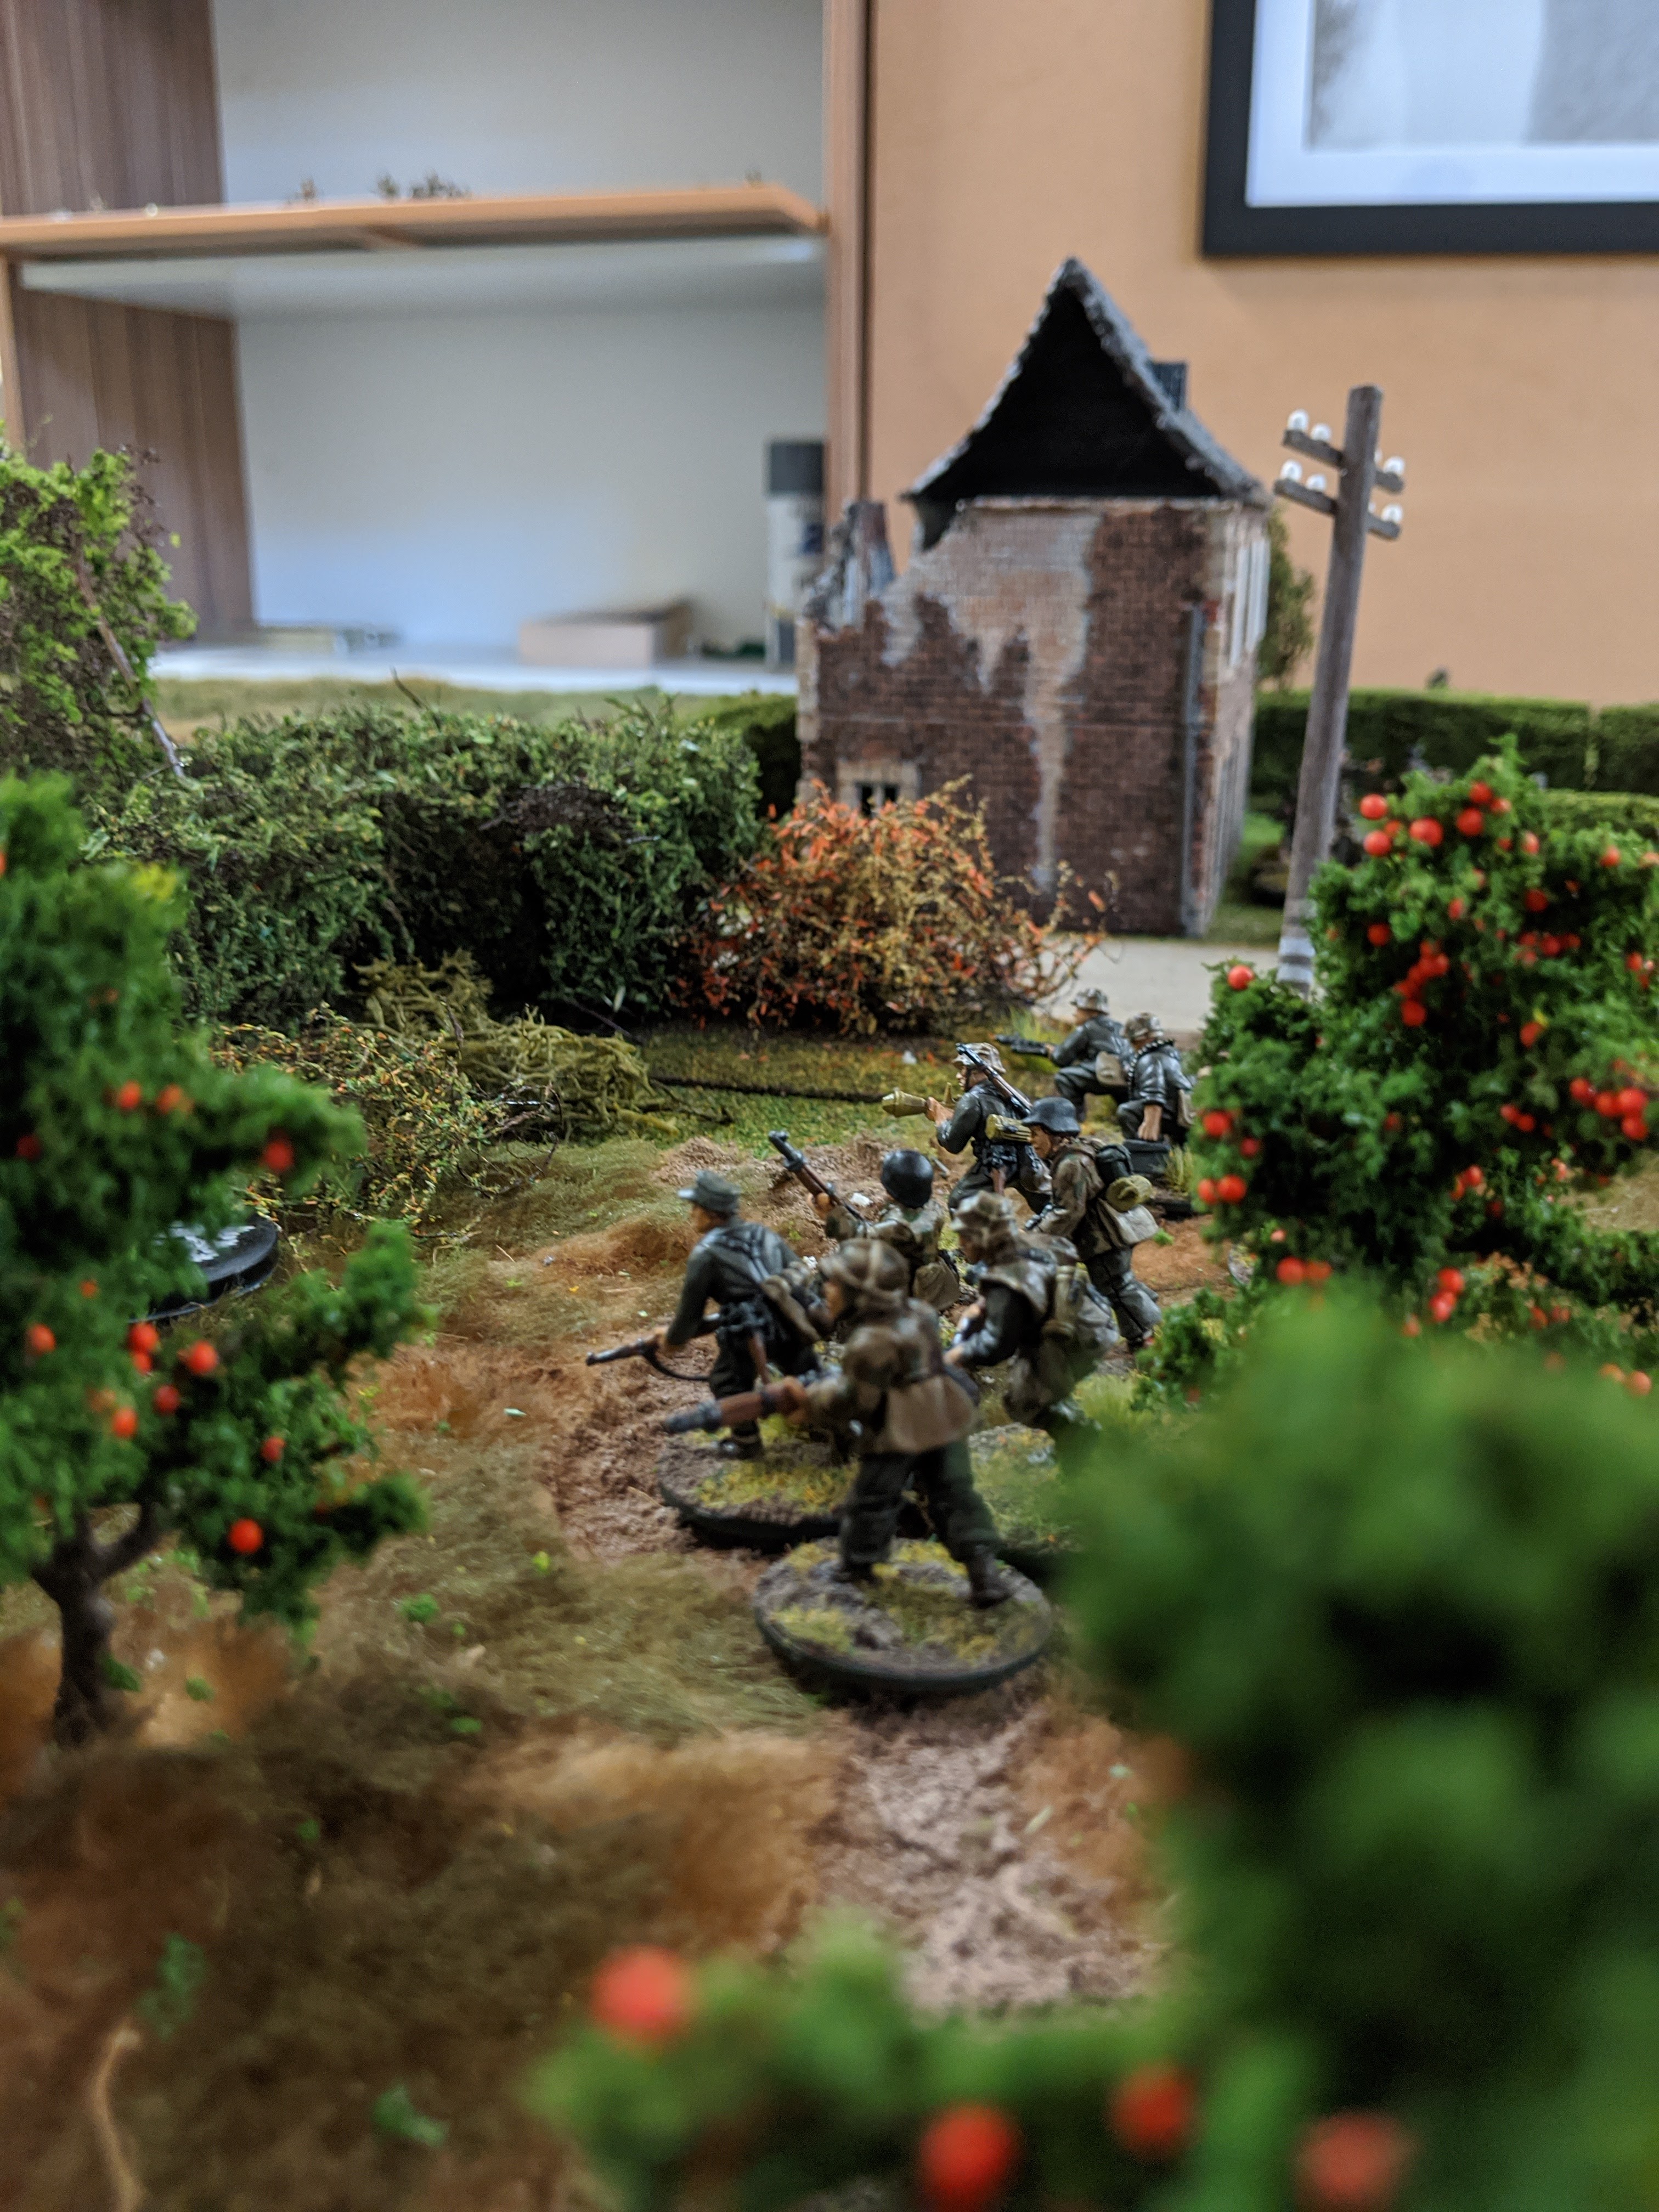 Deployment in the Orchard